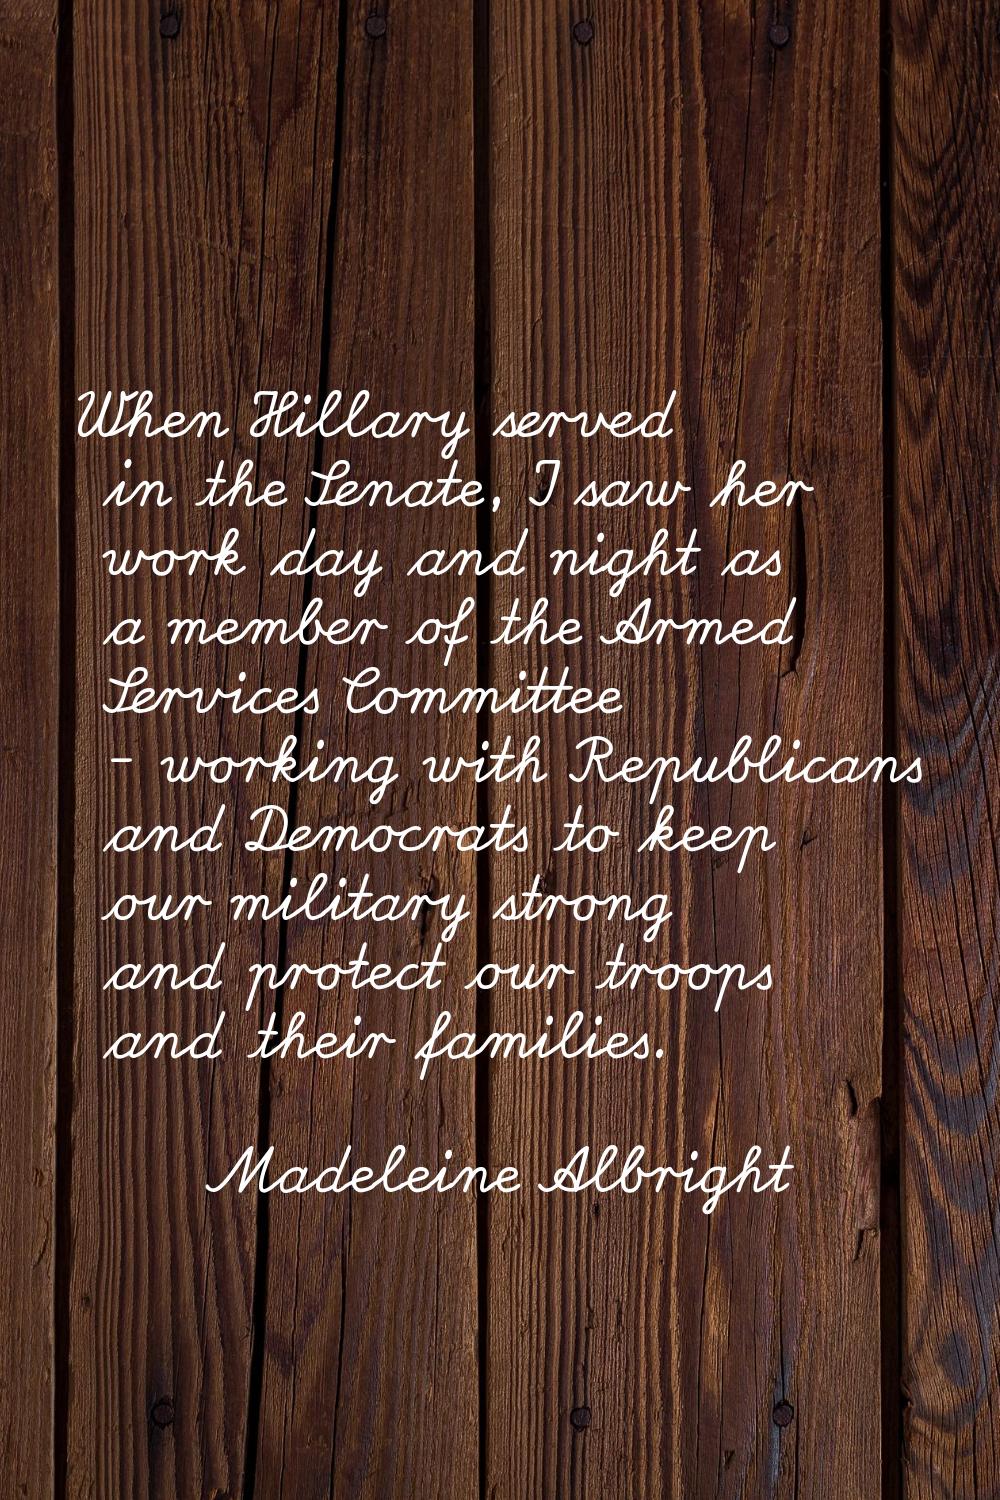 When Hillary served in the Senate, I saw her work day and night as a member of the Armed Services C